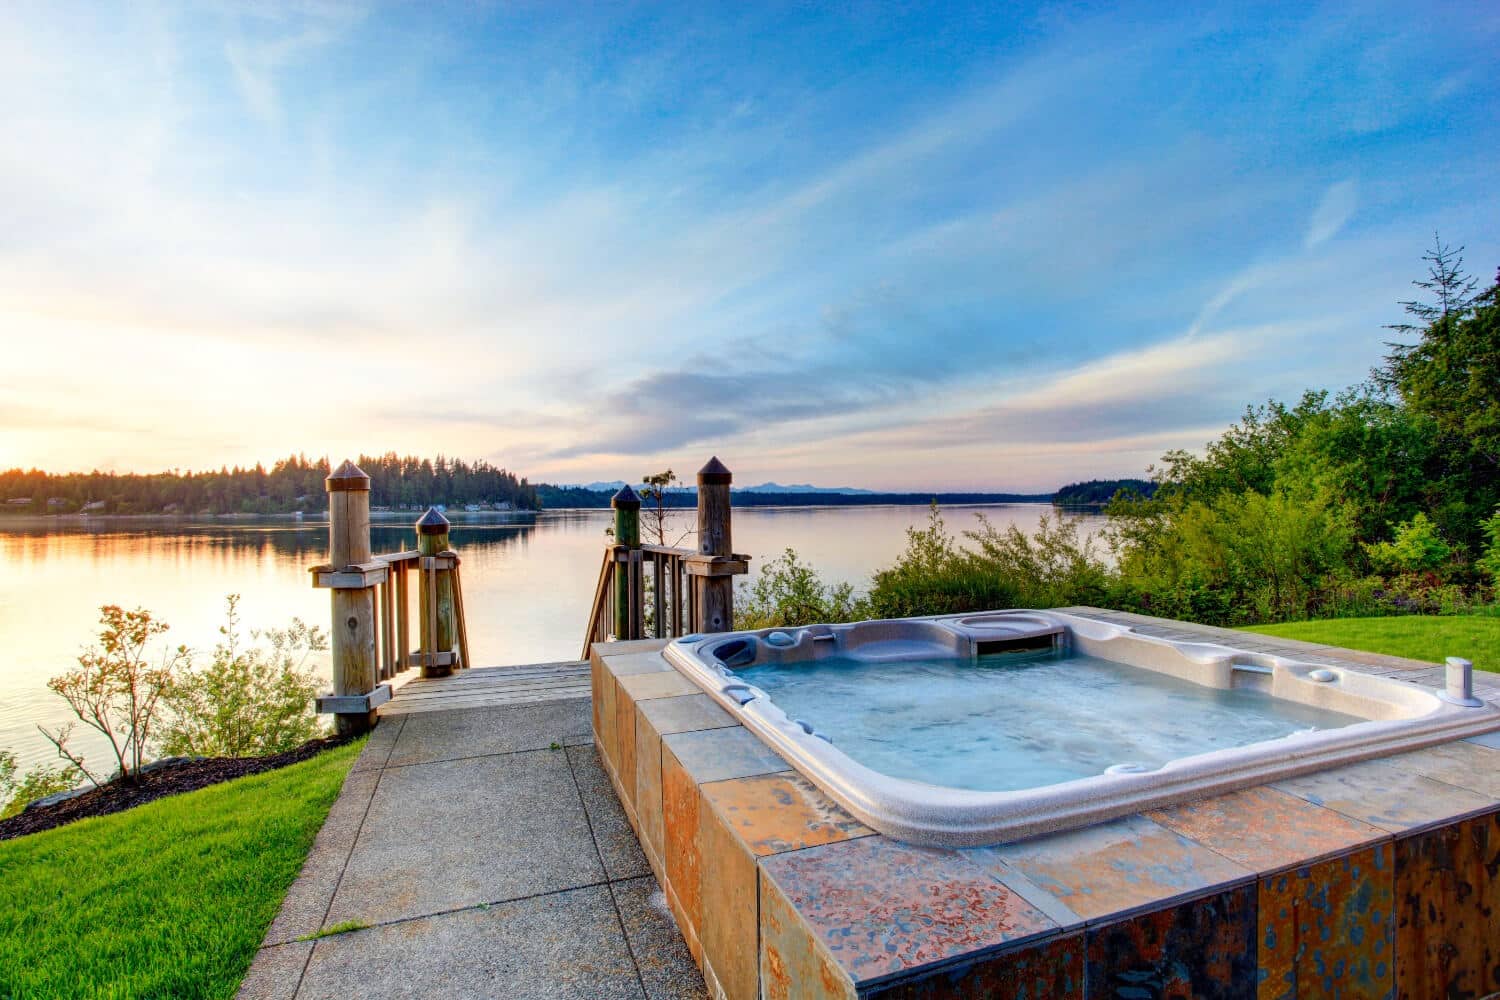 Choosing the right hot tub for your home and lifestyle